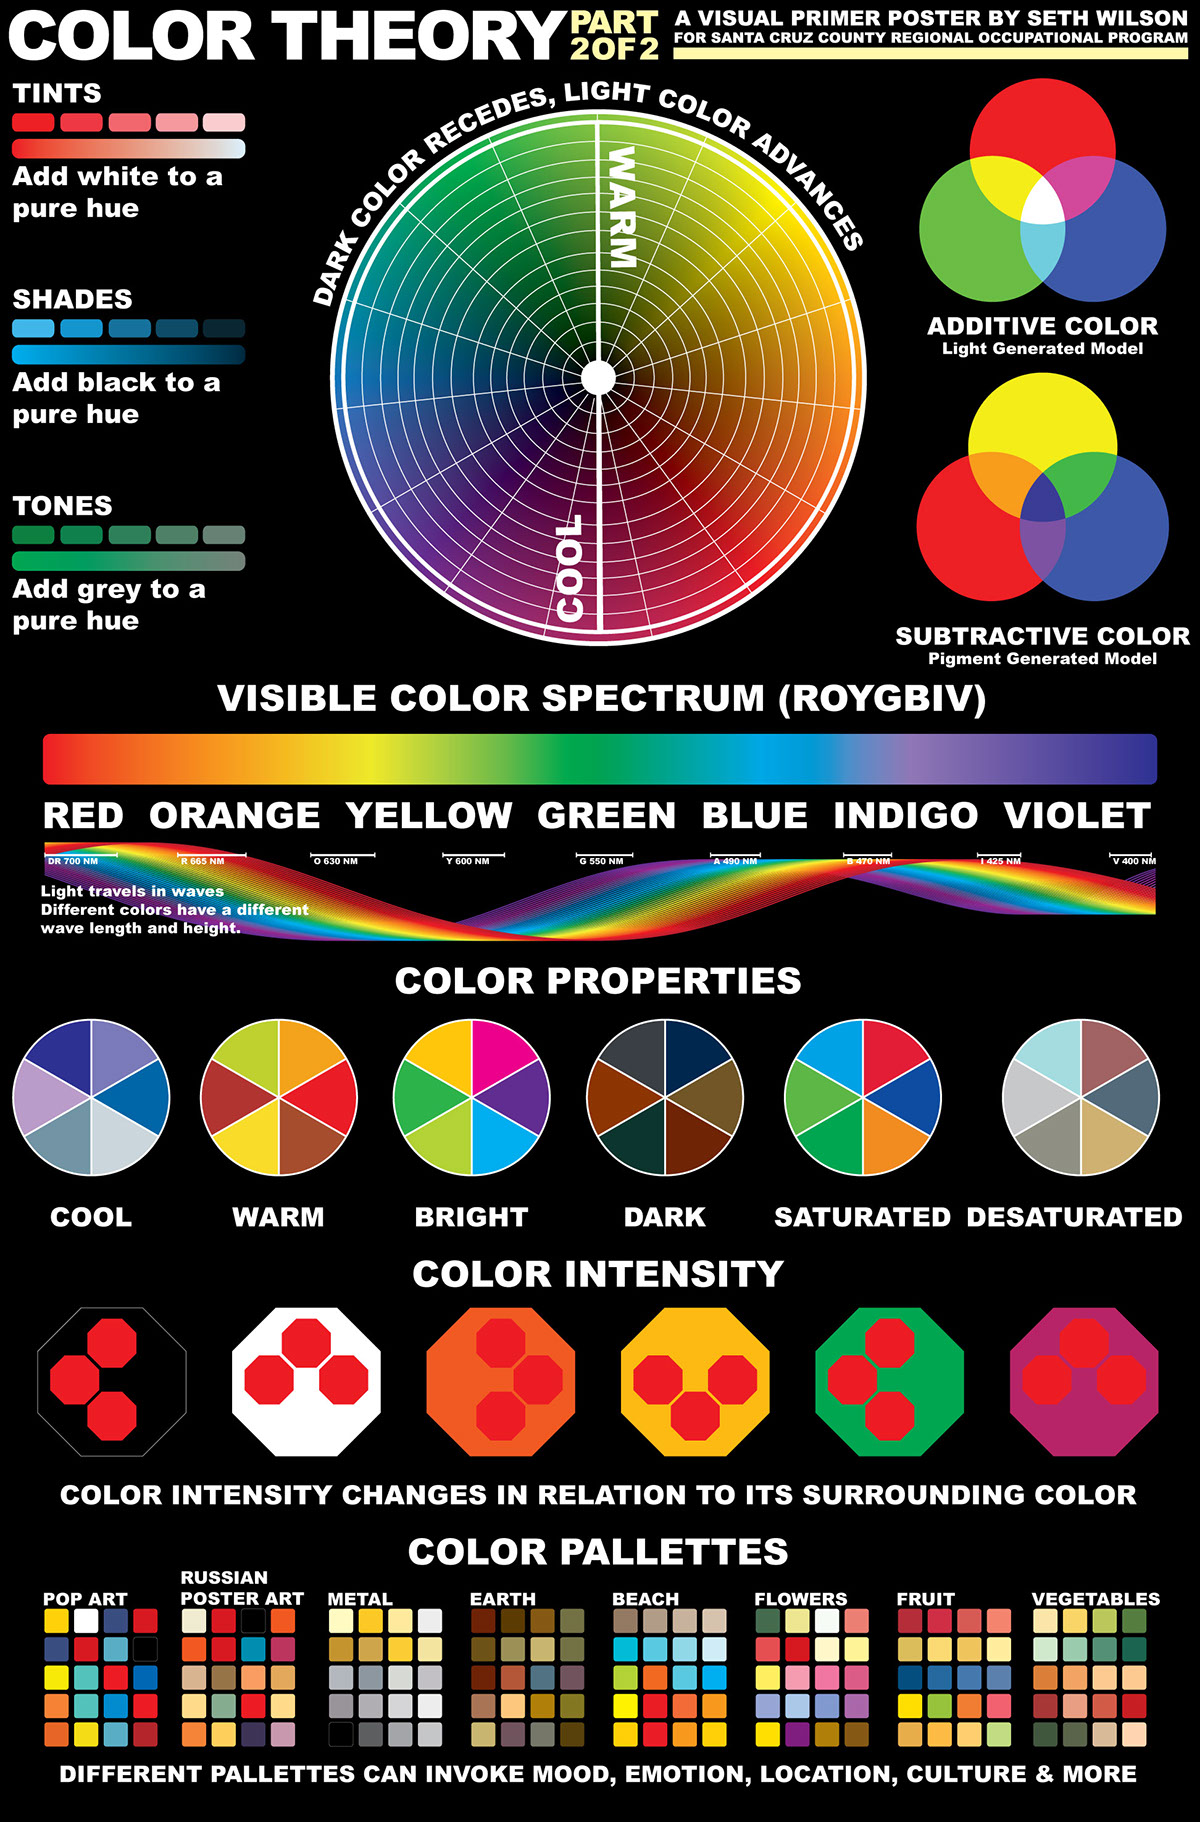 Education poster Poster Design color theory